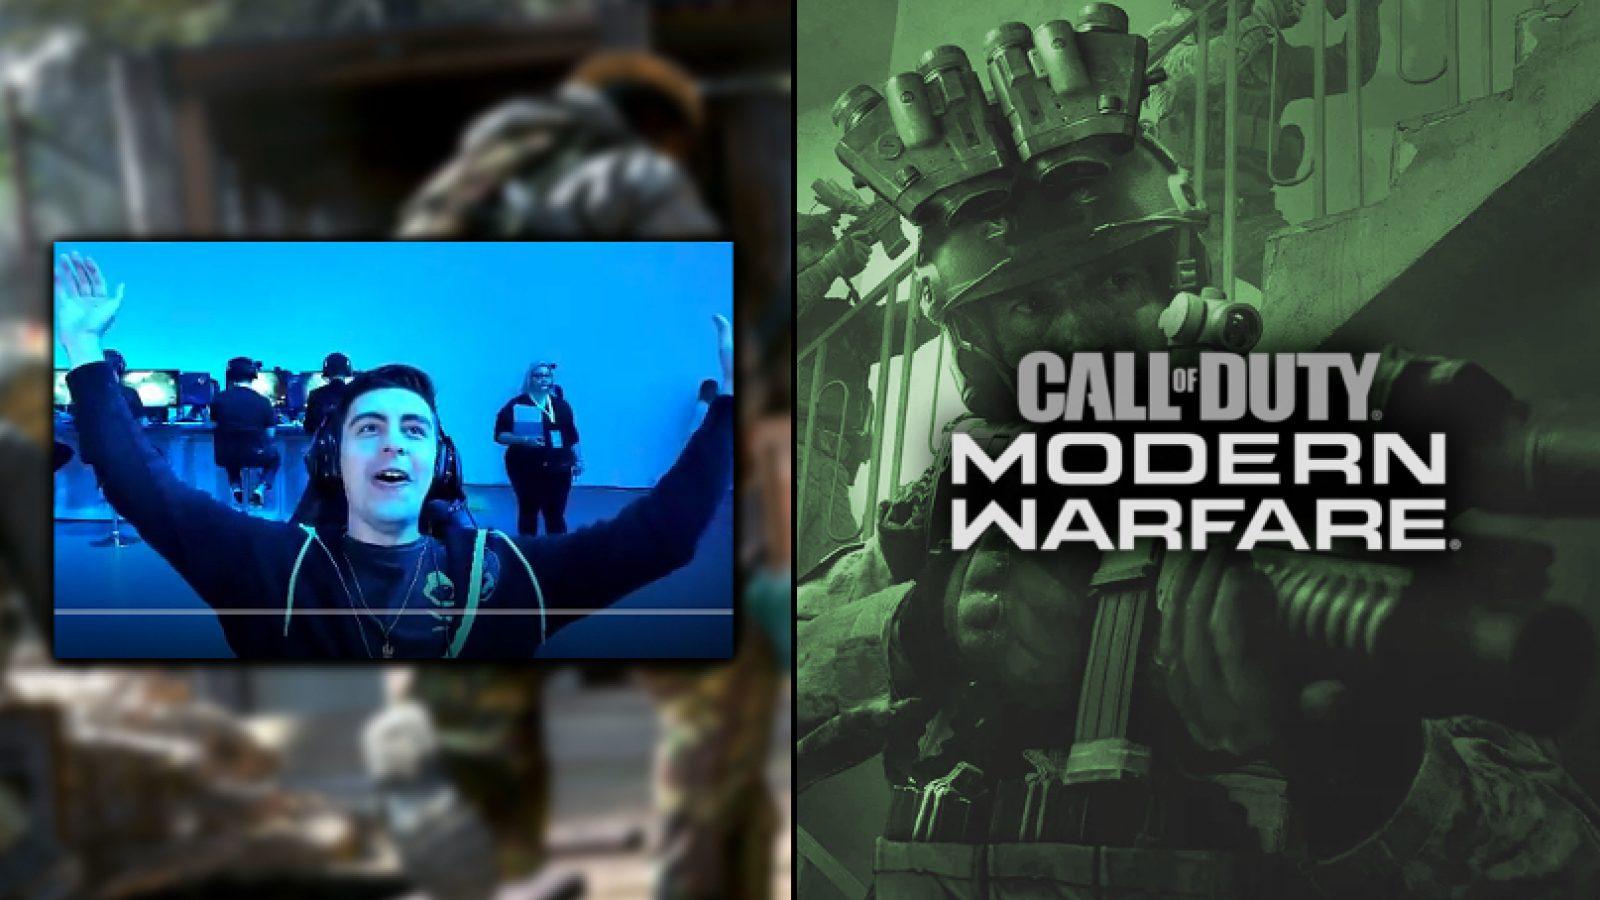 May be a finally a hope for call of duty mw 2019 crack : r/CrackWatch